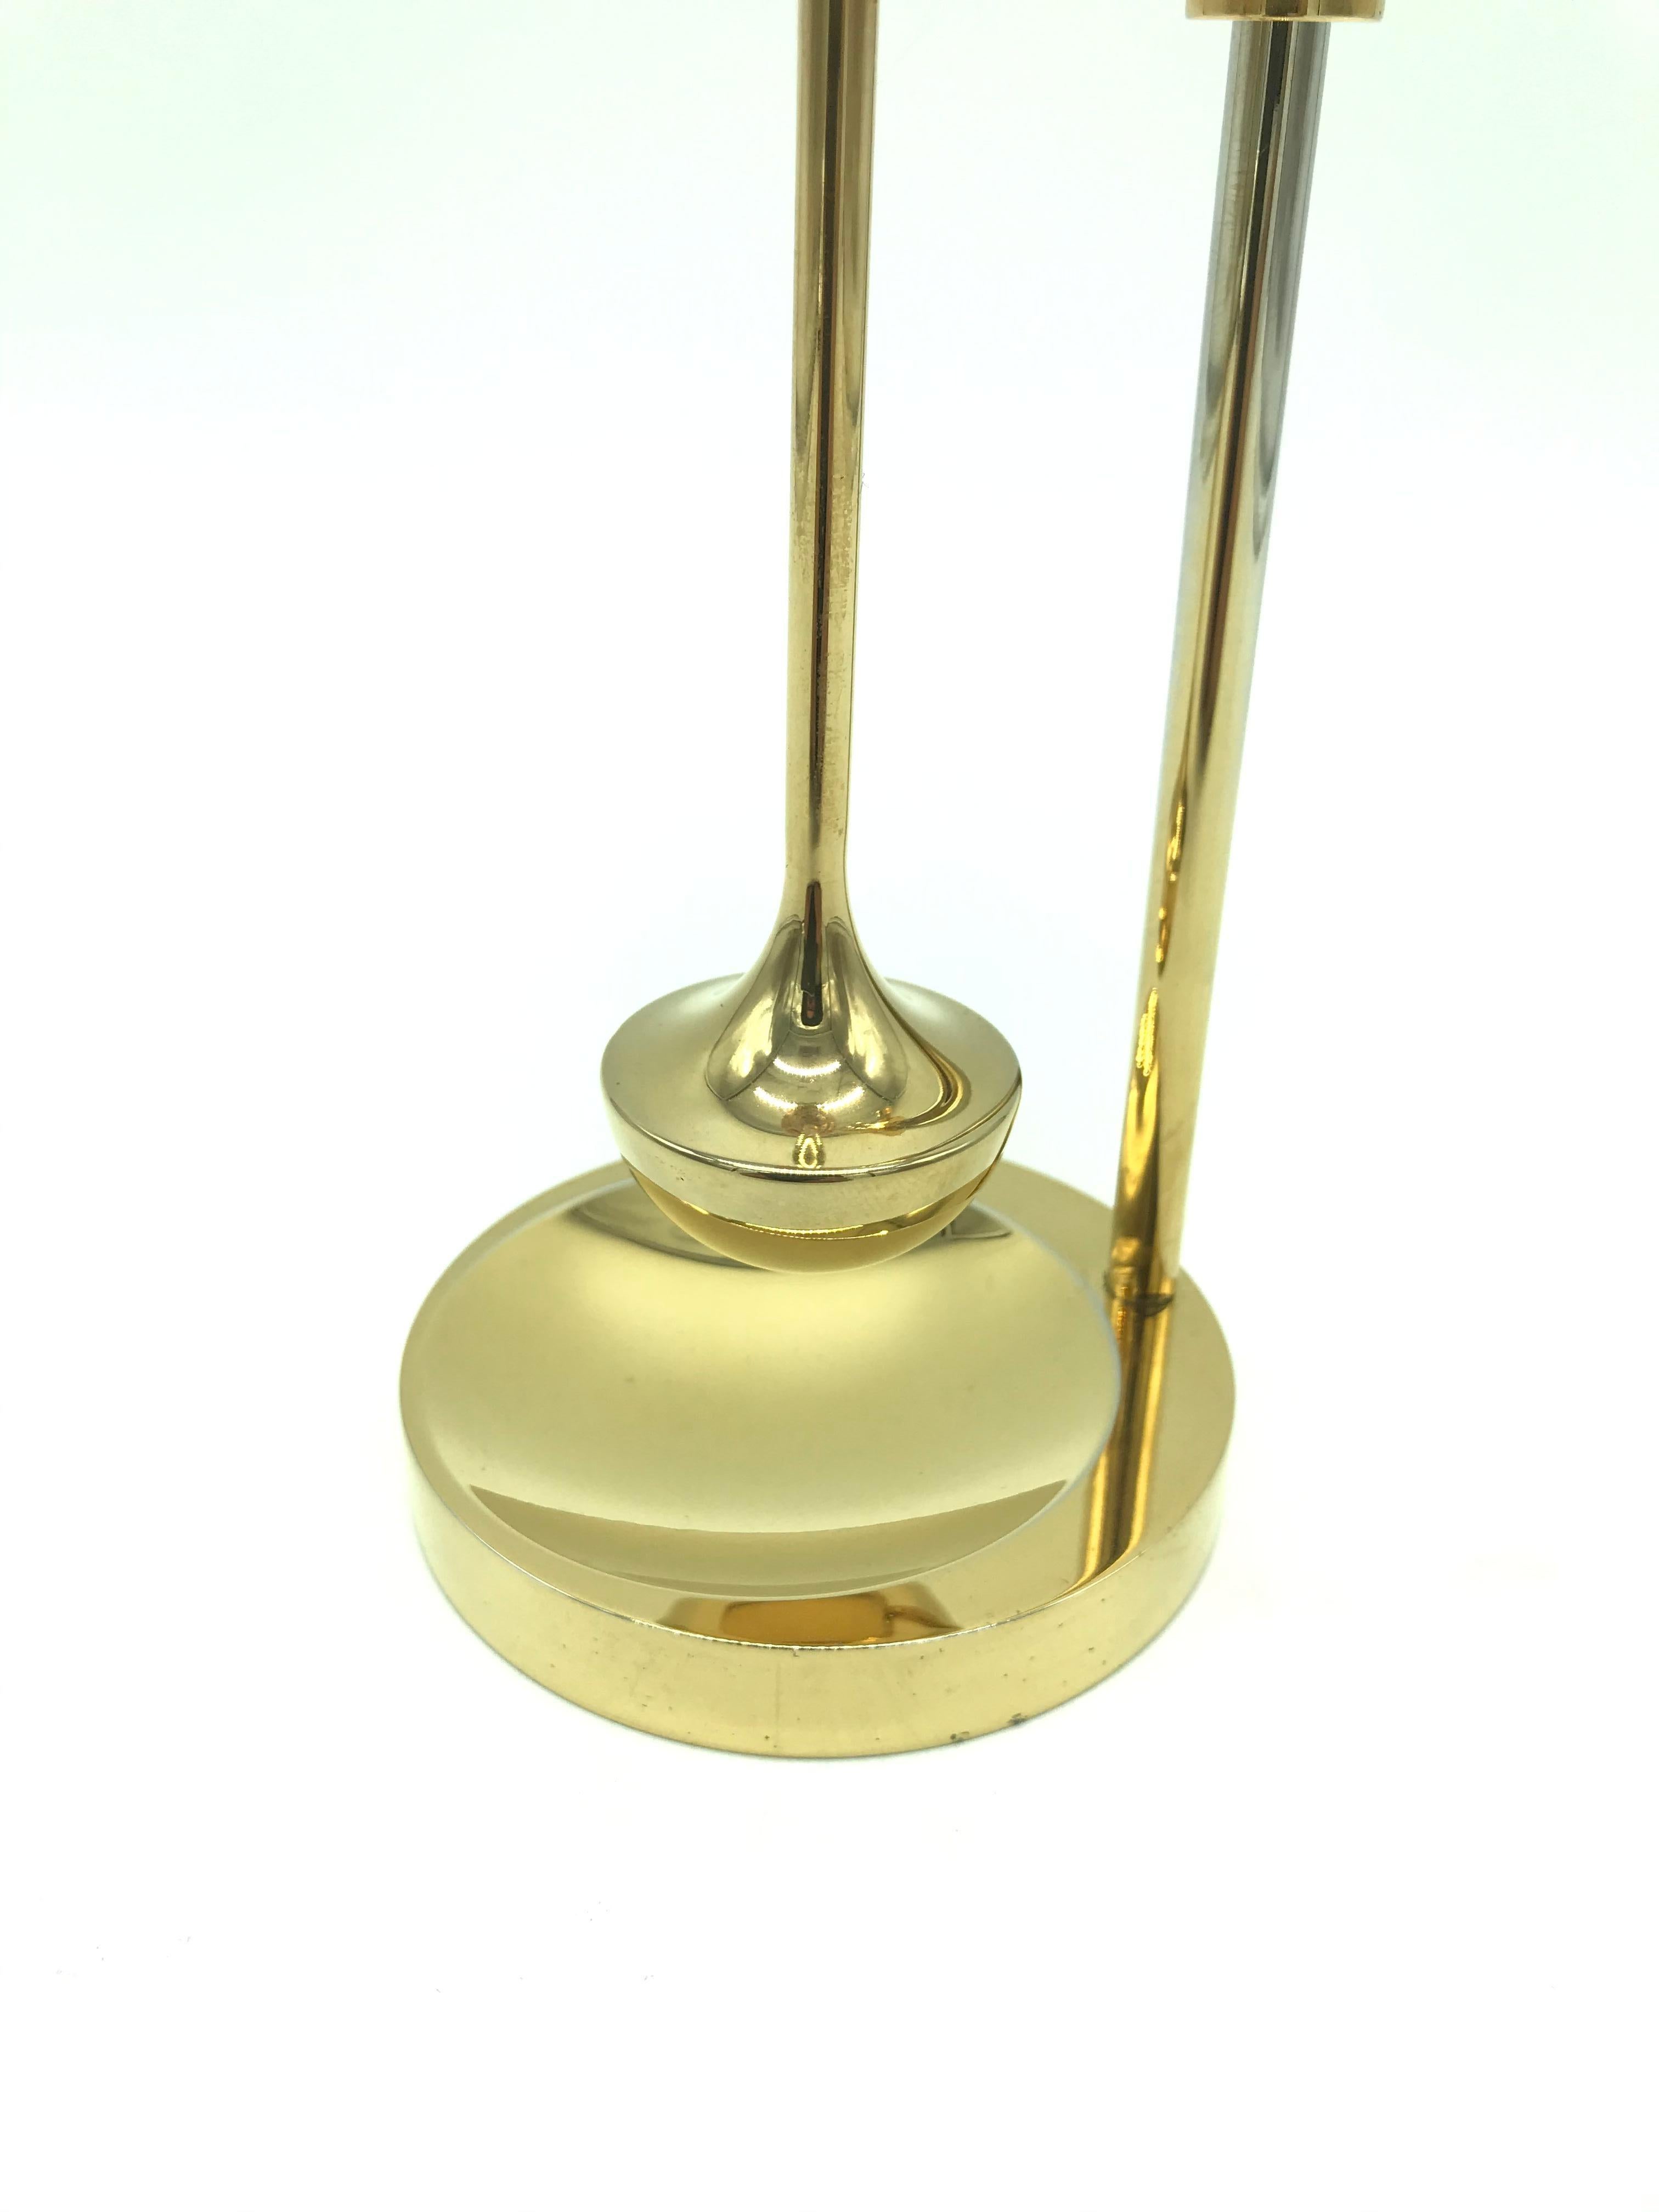 Vintage unused midcentury oil lamp by Ilse Ammonsen for Daproma Denmark
In 24-carat gold plate which is rare.
An extra wick will be included.
Runs on normal lamp oil. 



 